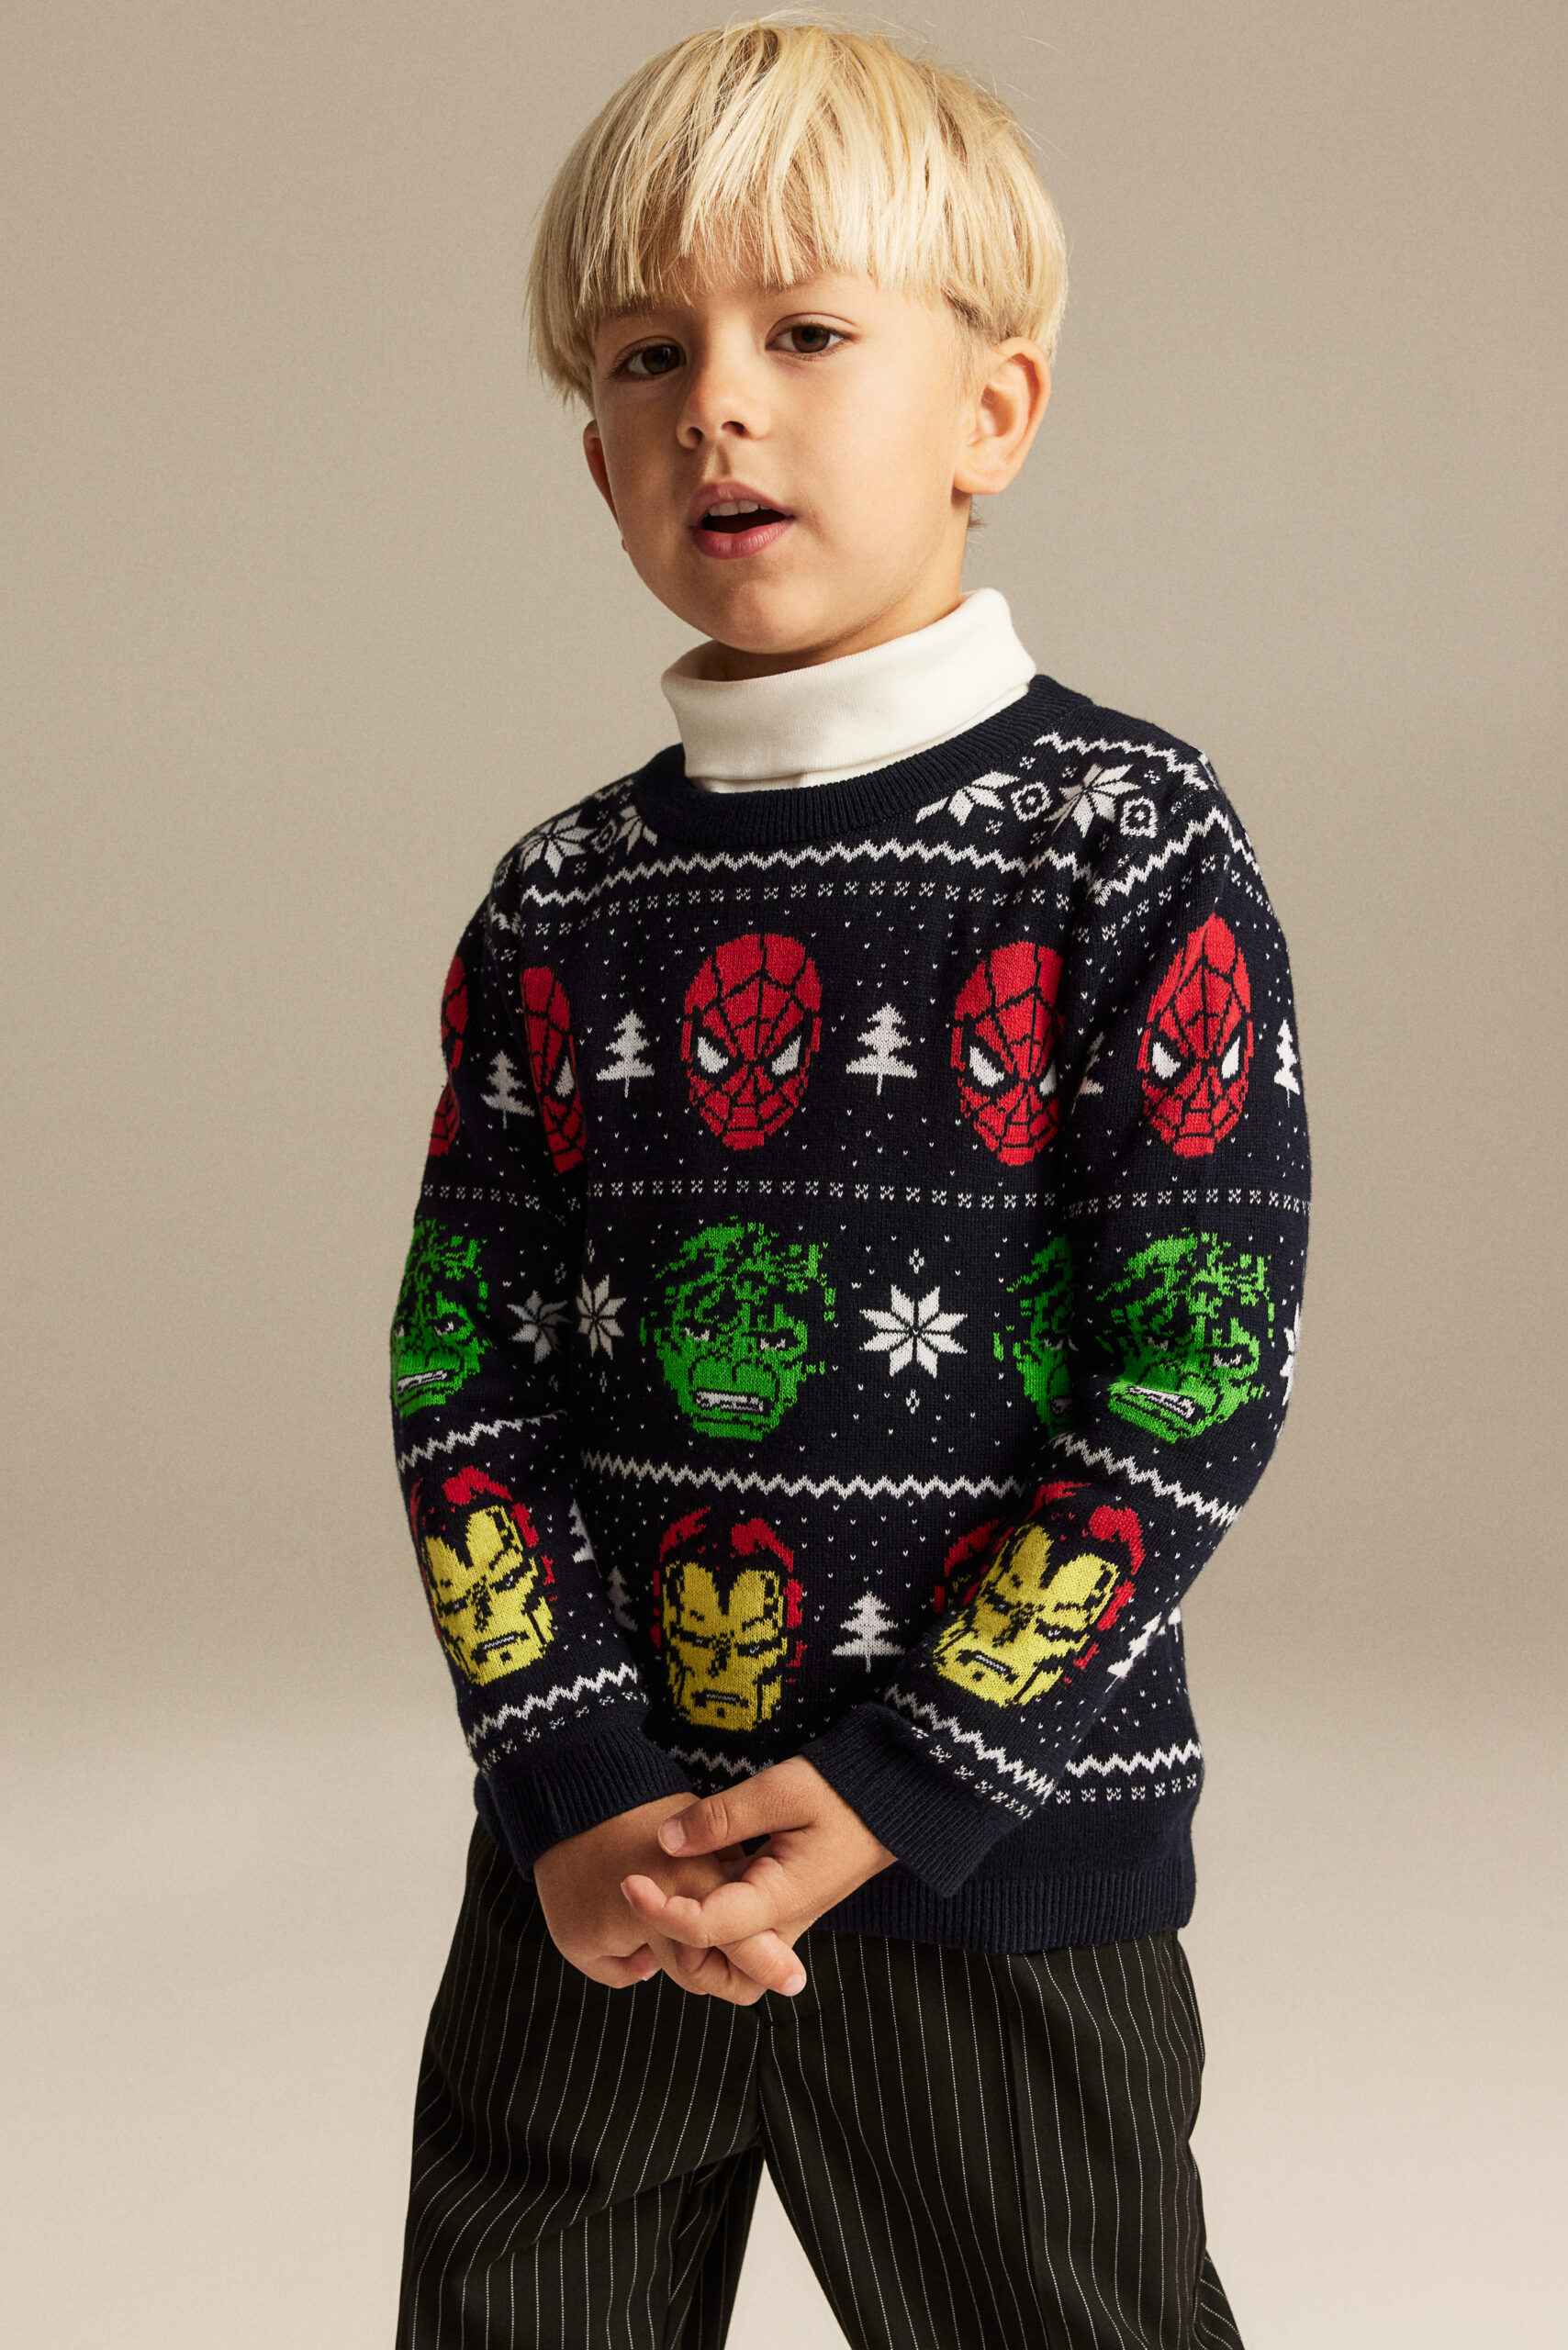 boy wearing jacquard-knit sweater with marvel characters including Spiderman, The Hulk and Iron Man